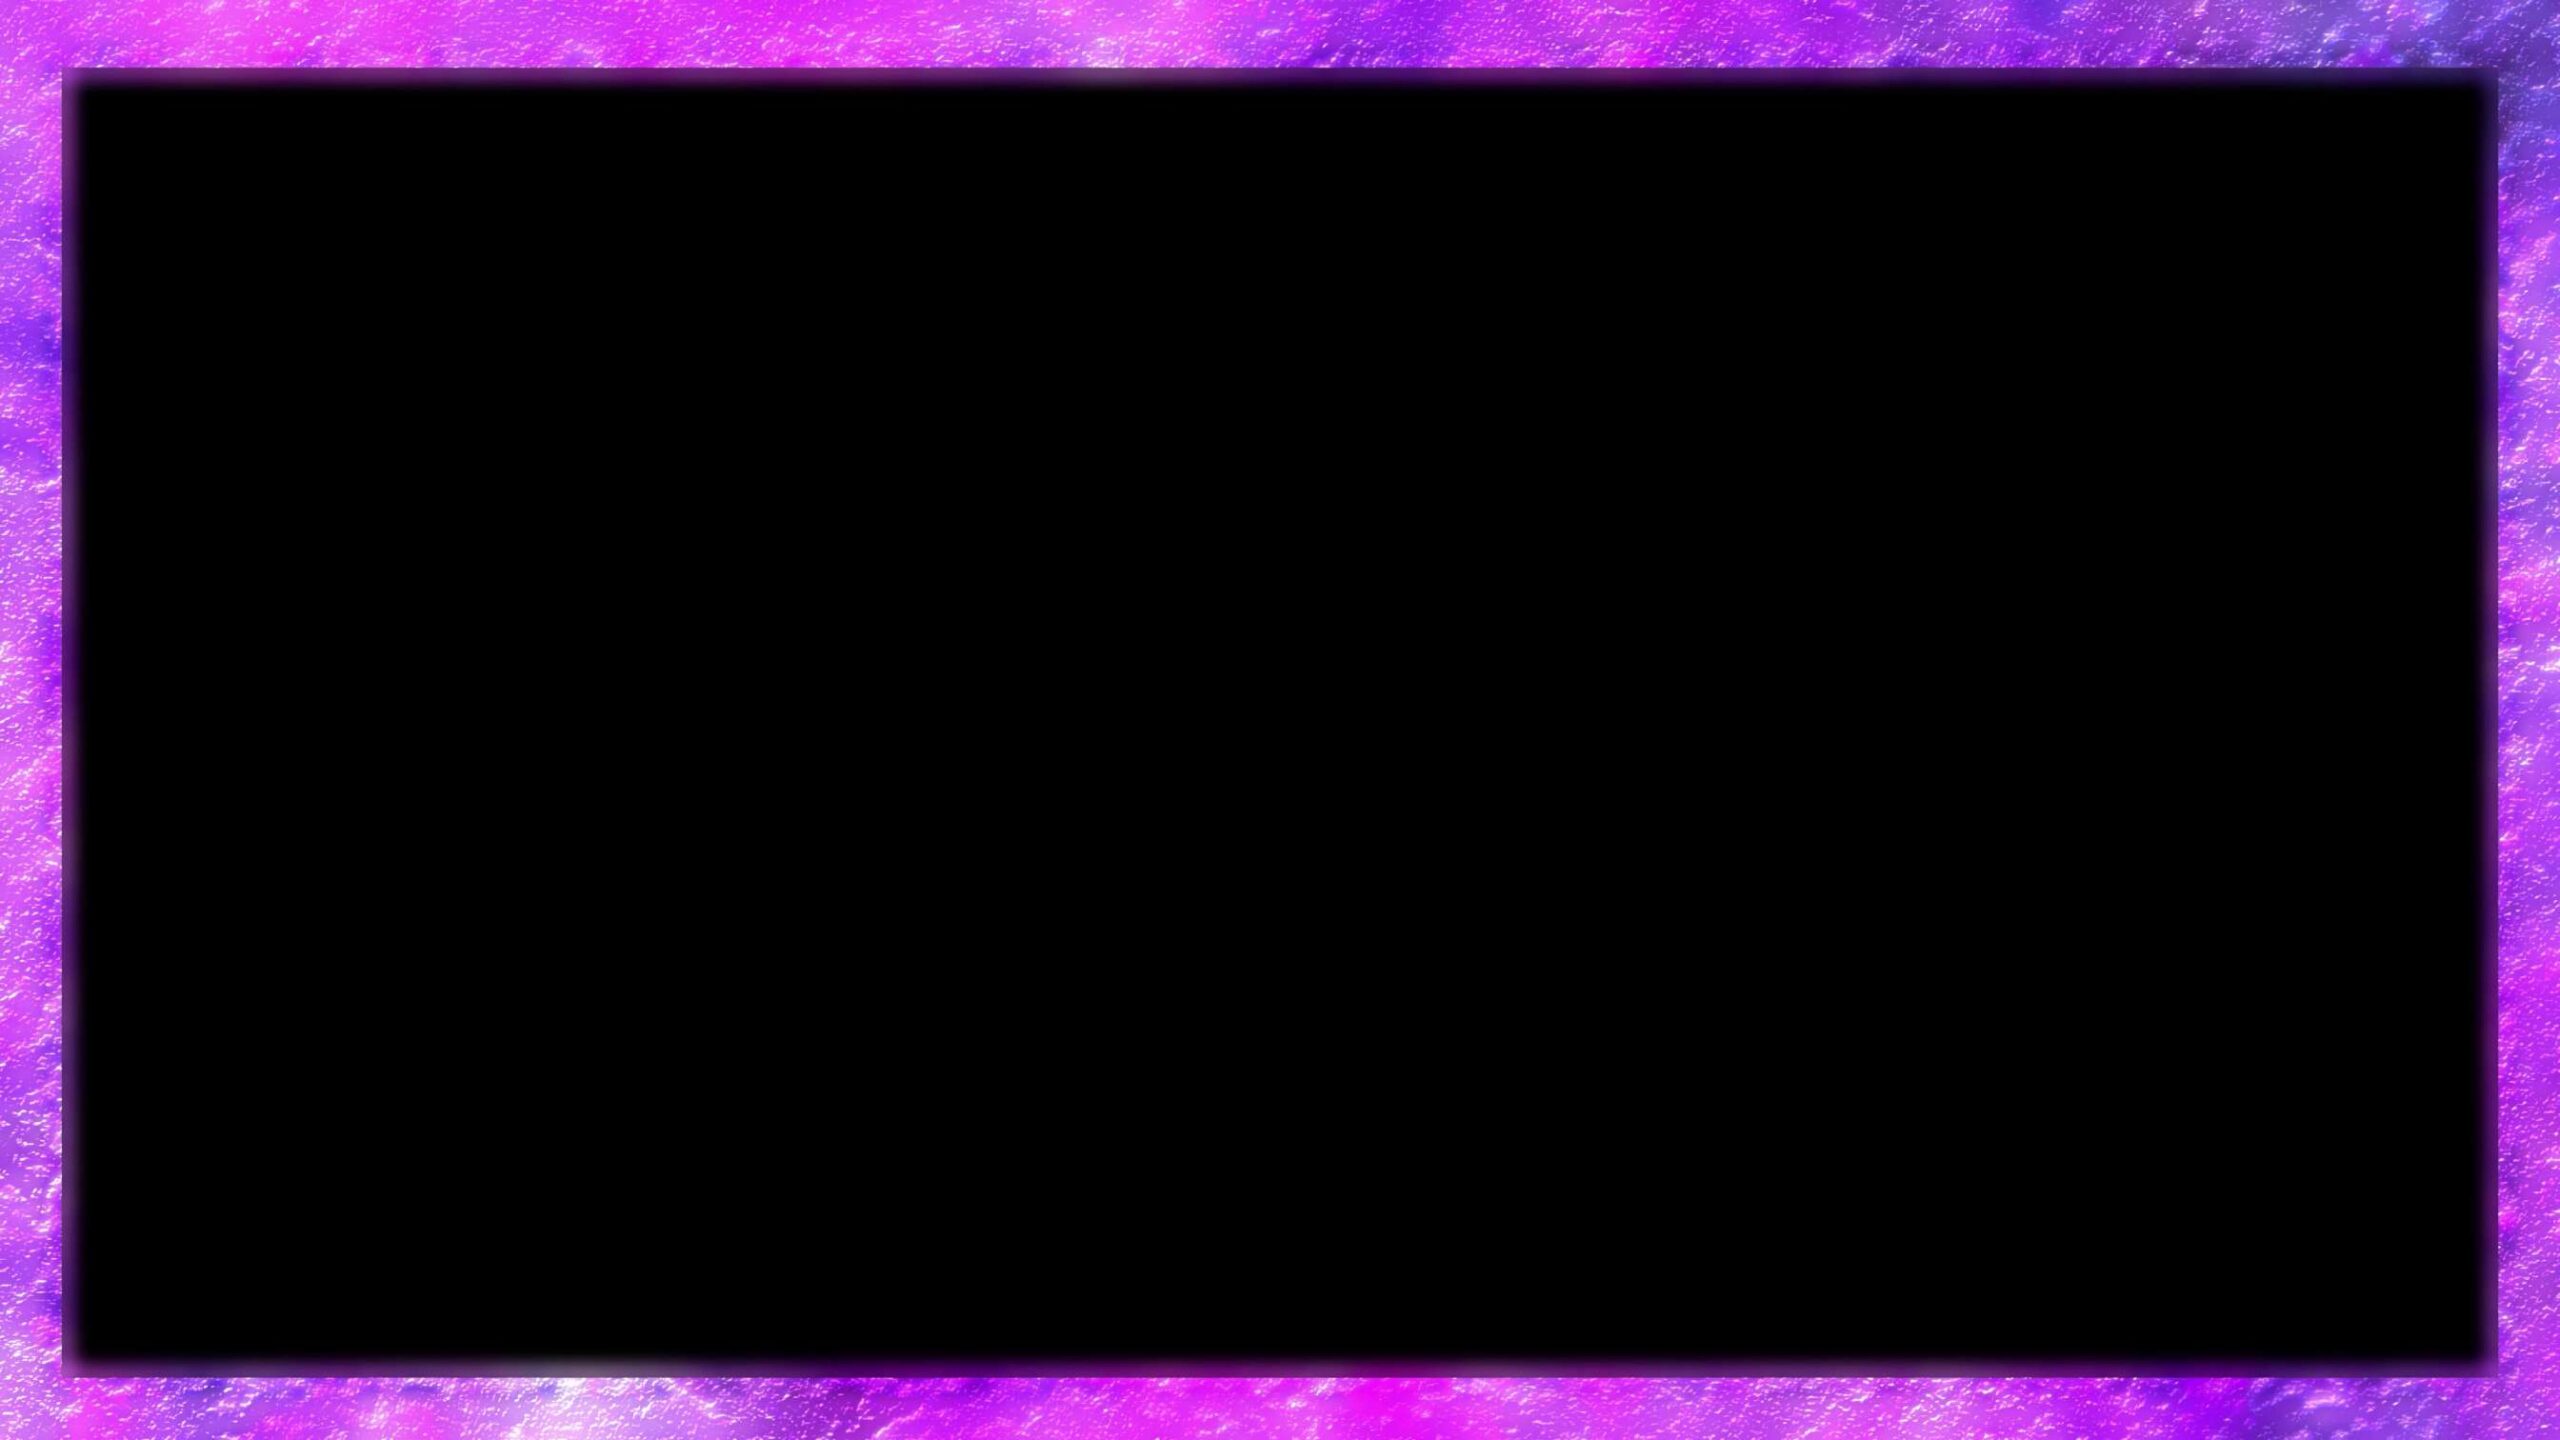 4K Purple Textured Borders Overlay Effect Free Download || Overlay Effect For Editing